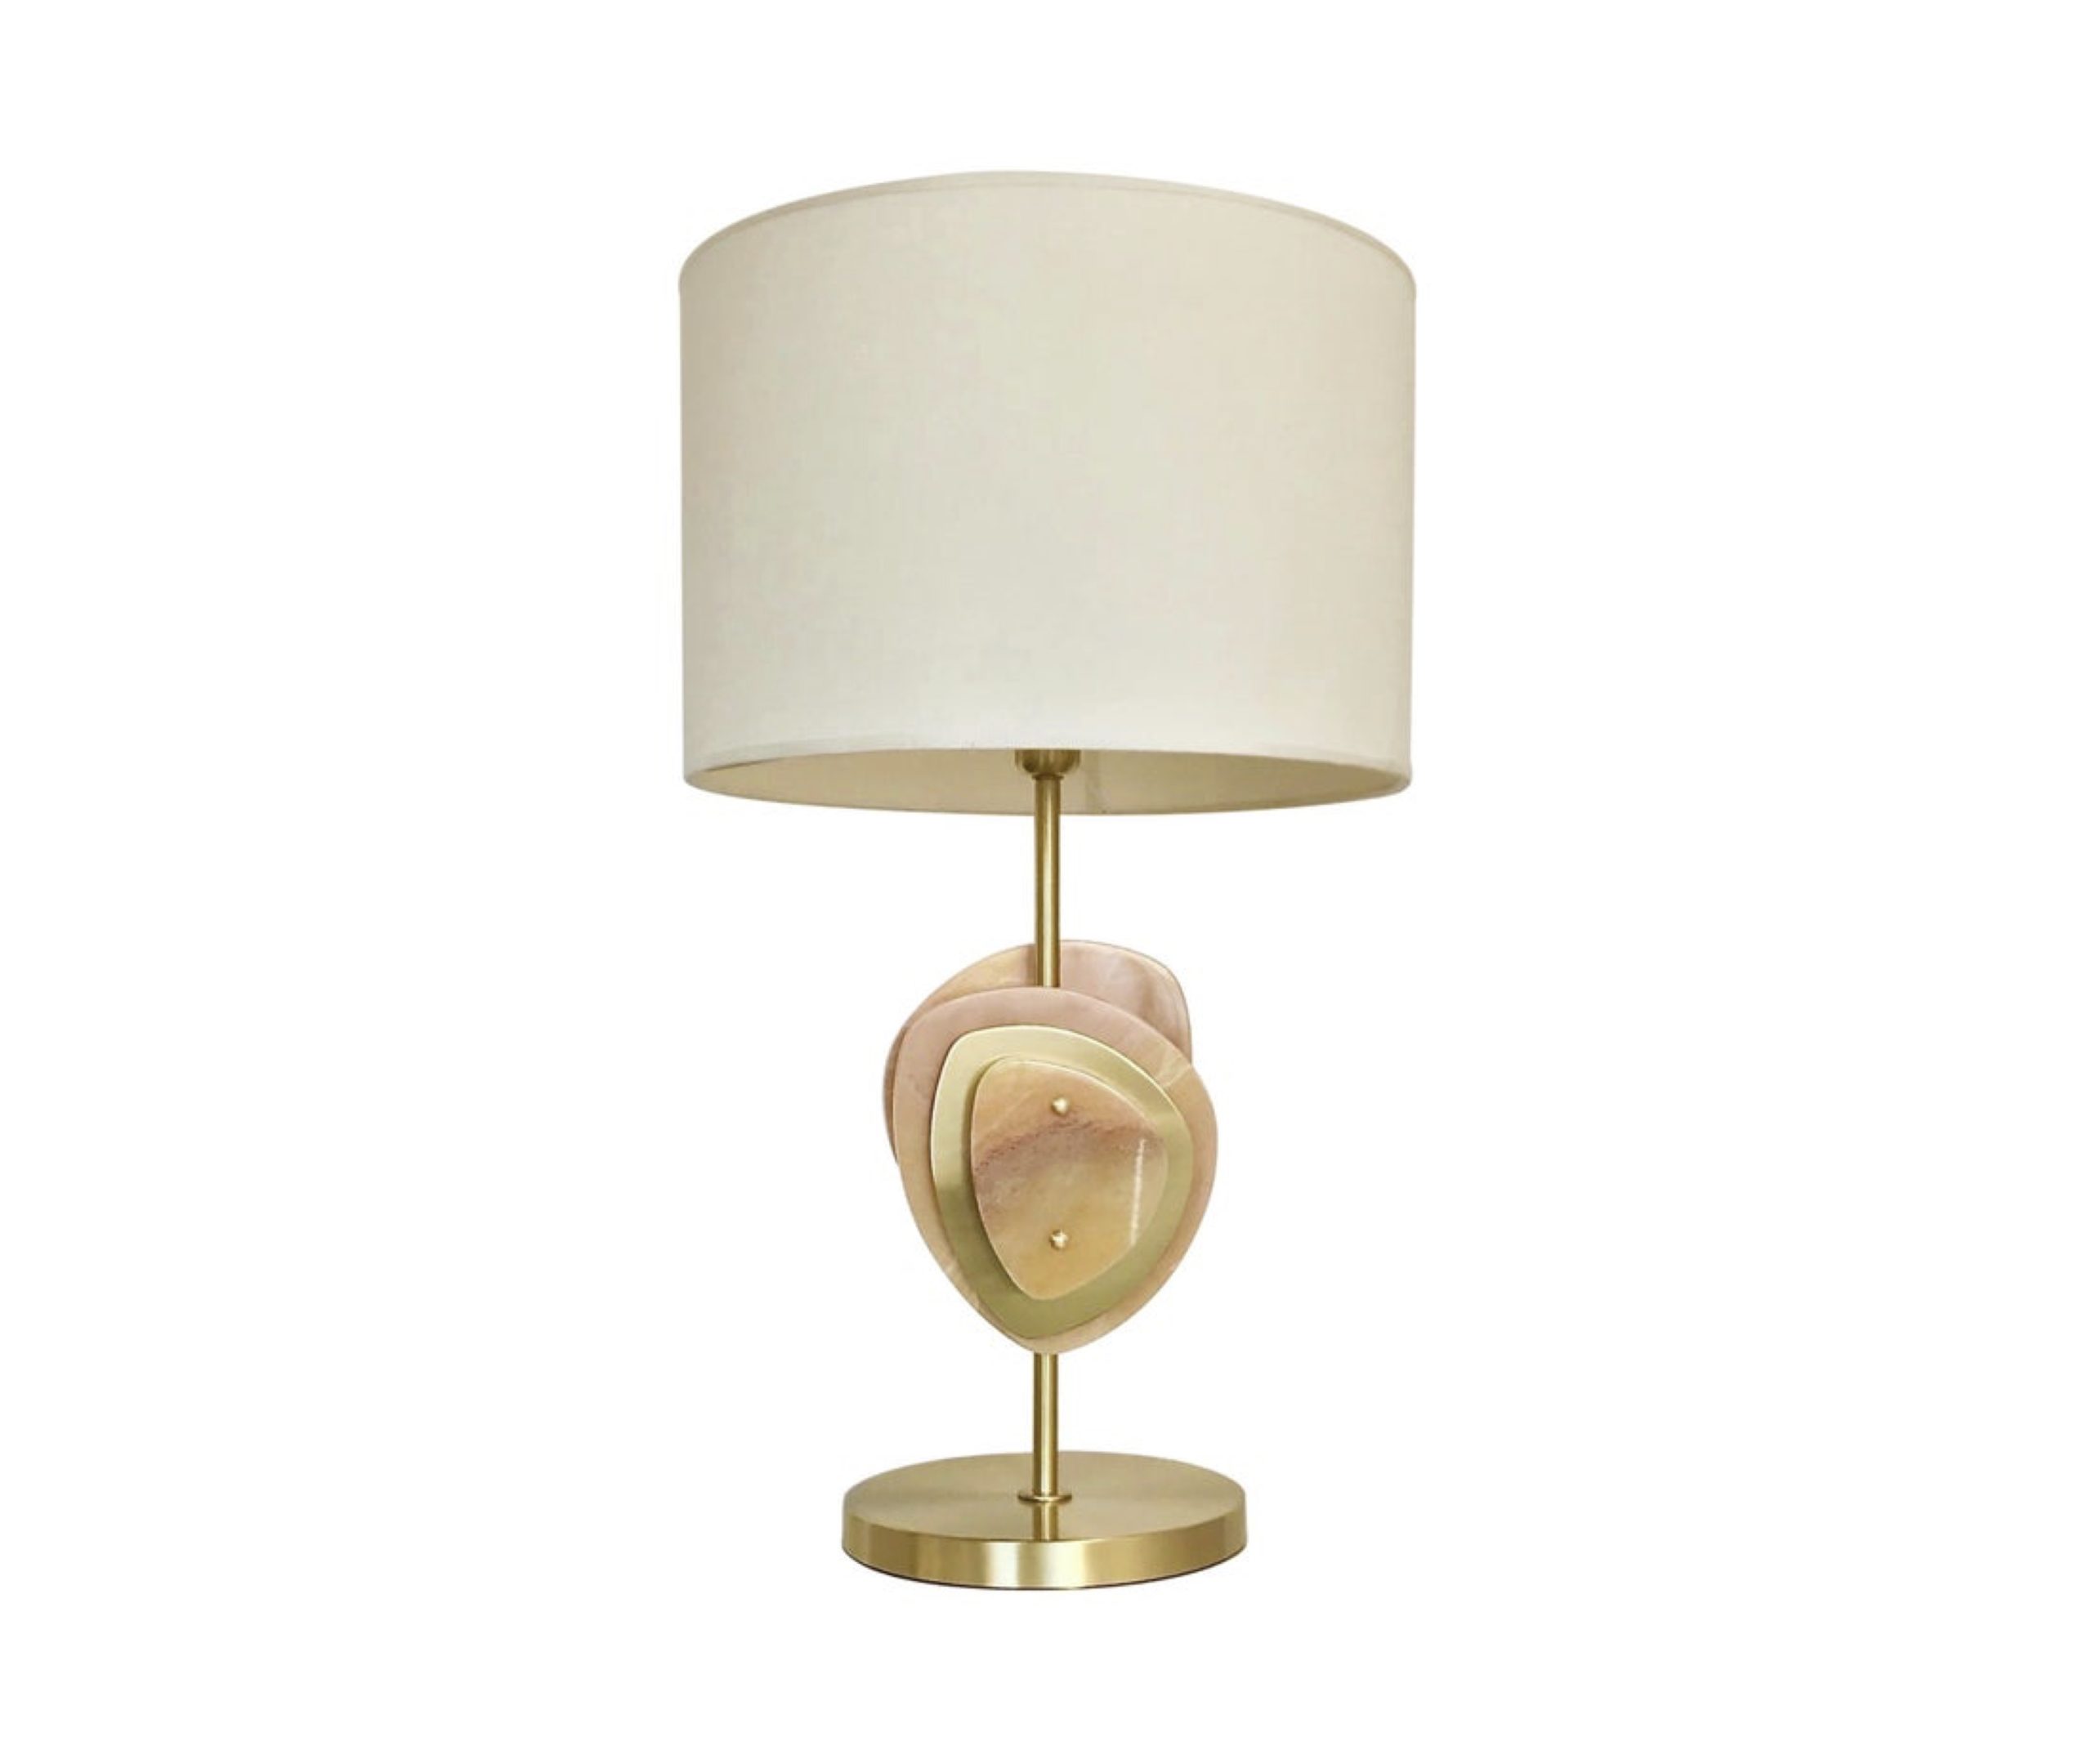 cosulich_interiors_and_antiques_products_new_york_design_bespoke_italian_organic_modern_amber_onyx_satin_brass_satellite_table_lamp-scaled-1